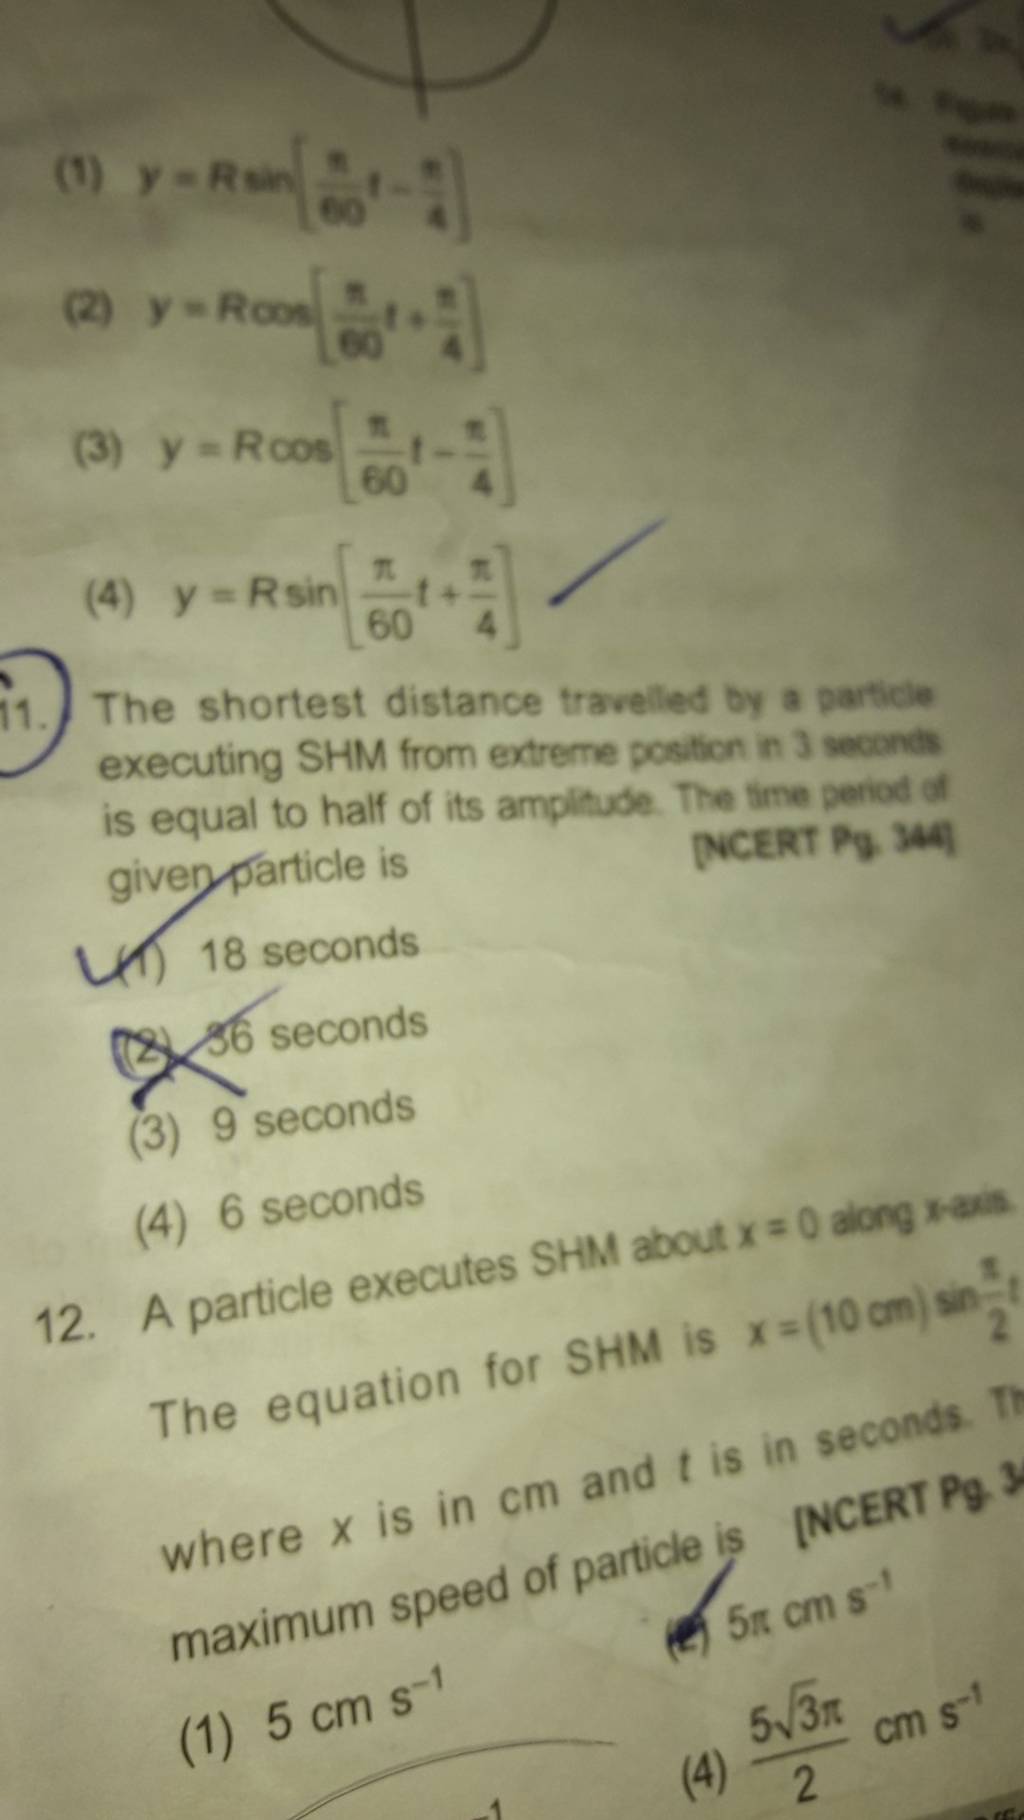 A particle executes SHM about x=0 along xas The equation for SHM is x=